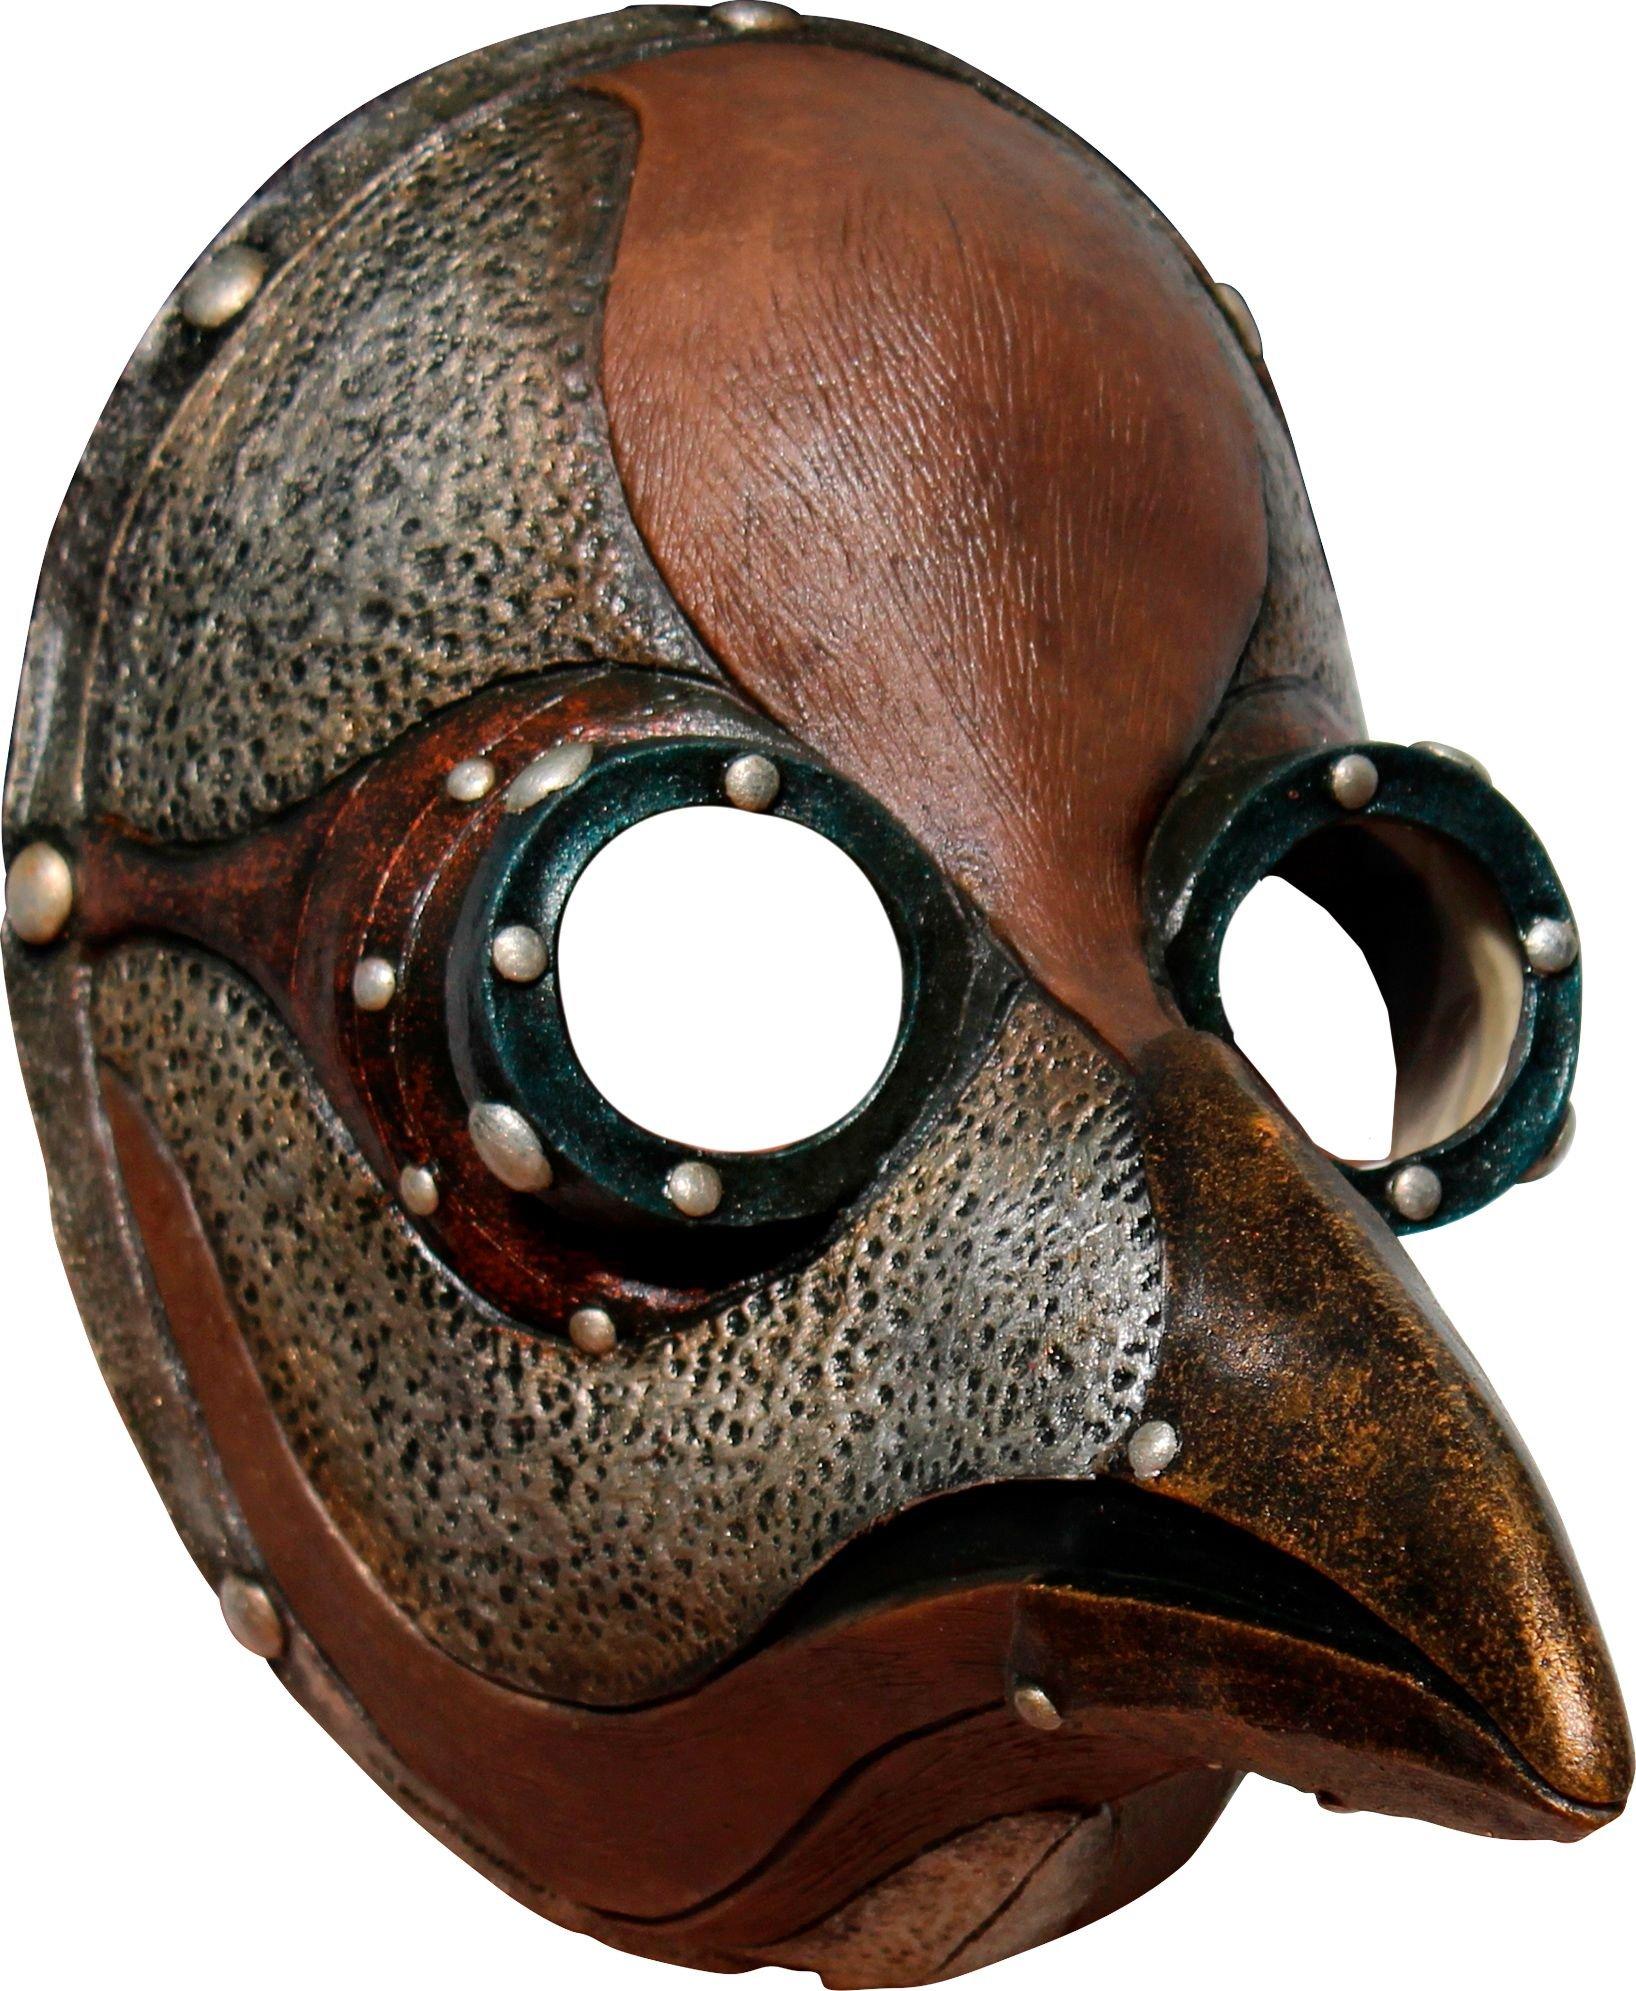 Adult Steampunk Plague Doctor Mask